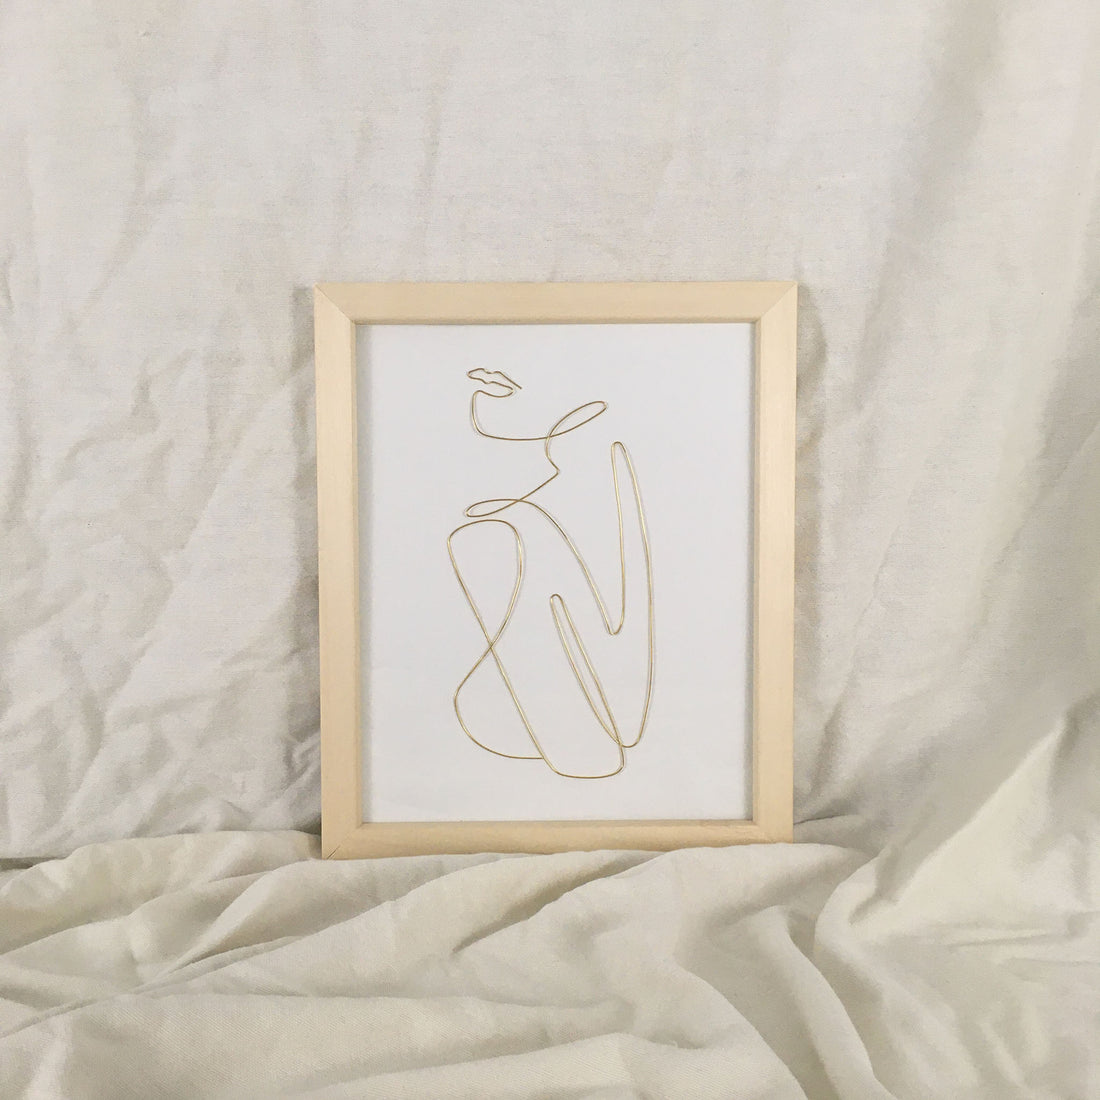 Comfort wire art - natural frame gold wire